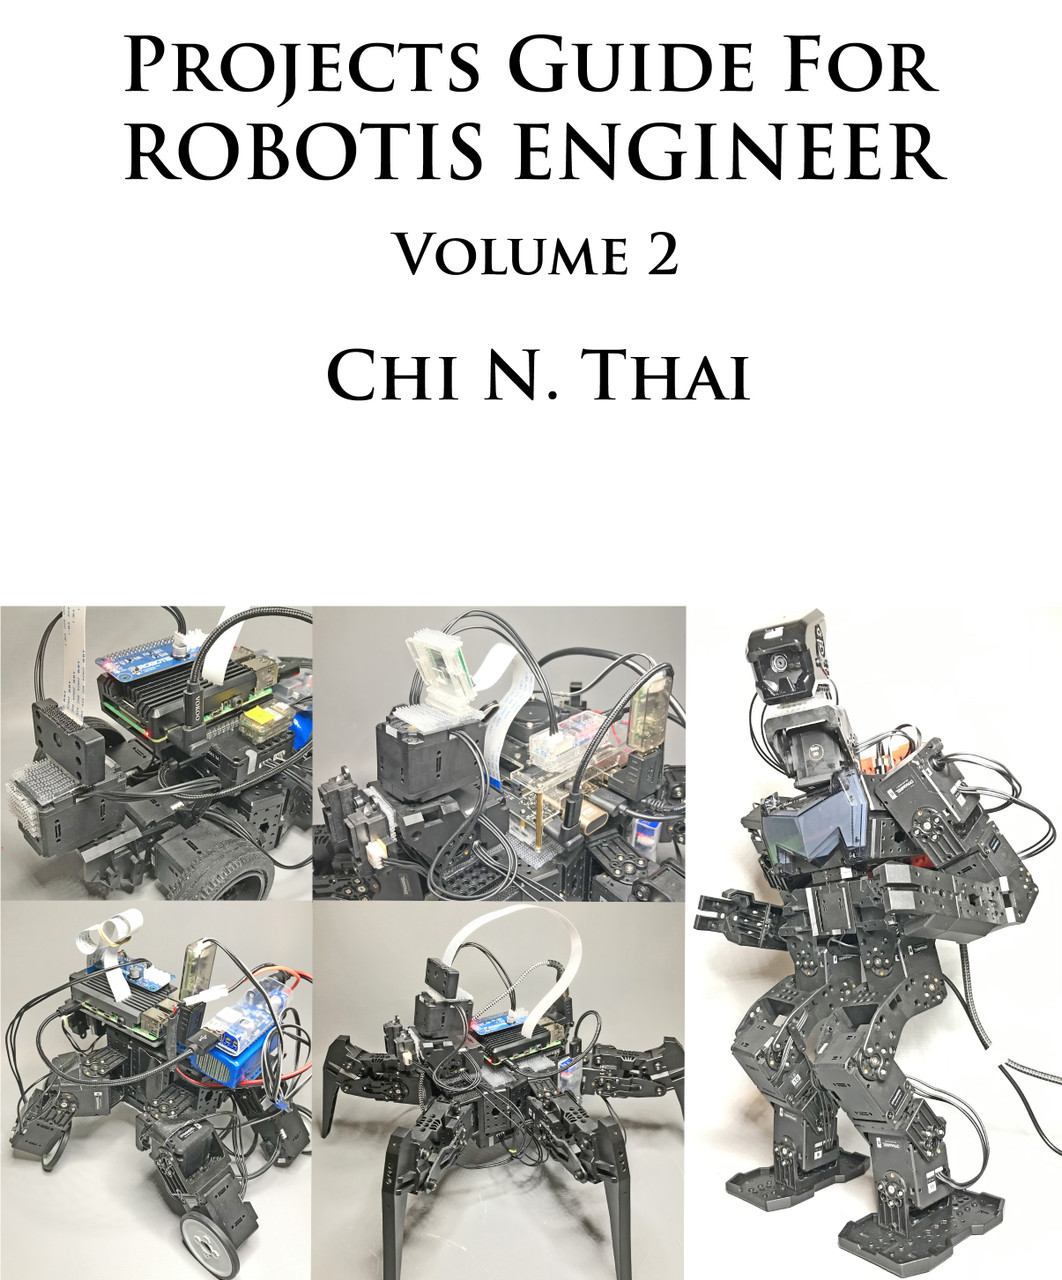 Projects Guide for ROBOTIS Engineer: Volume 2